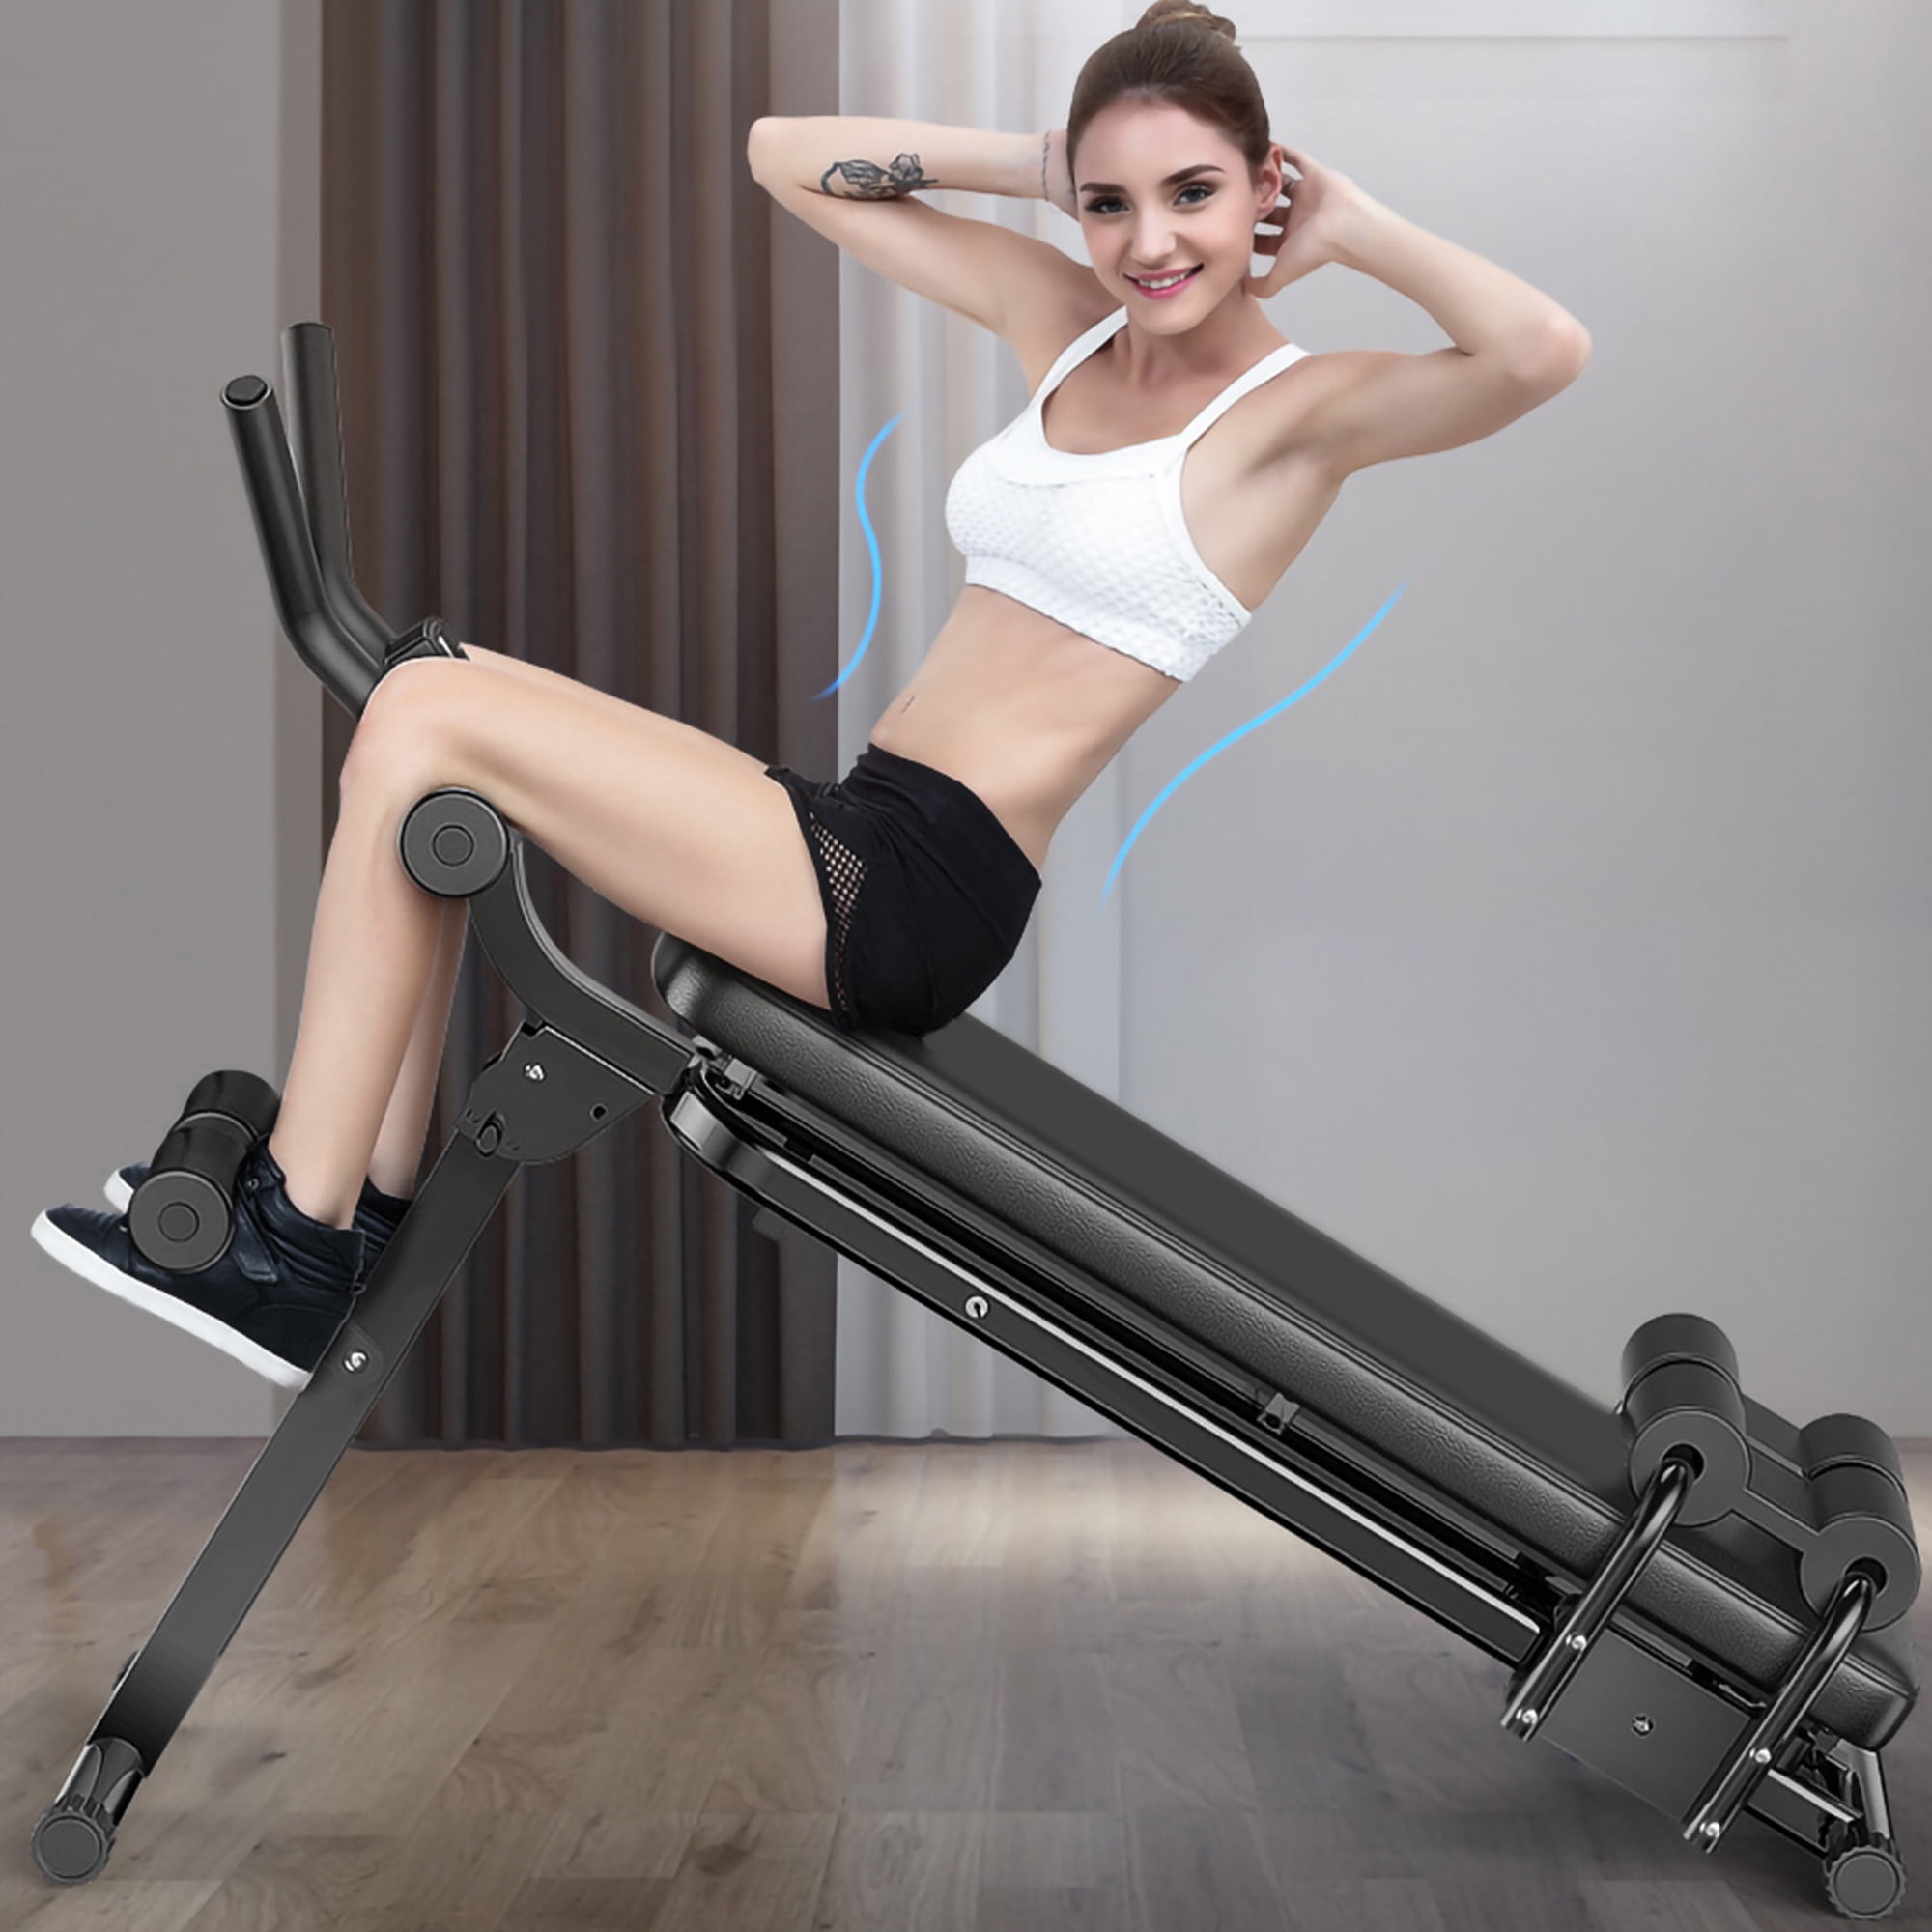 Adjustable Back Hyperextension Fitness Bench for Home & Gym Abdominal Workouts 